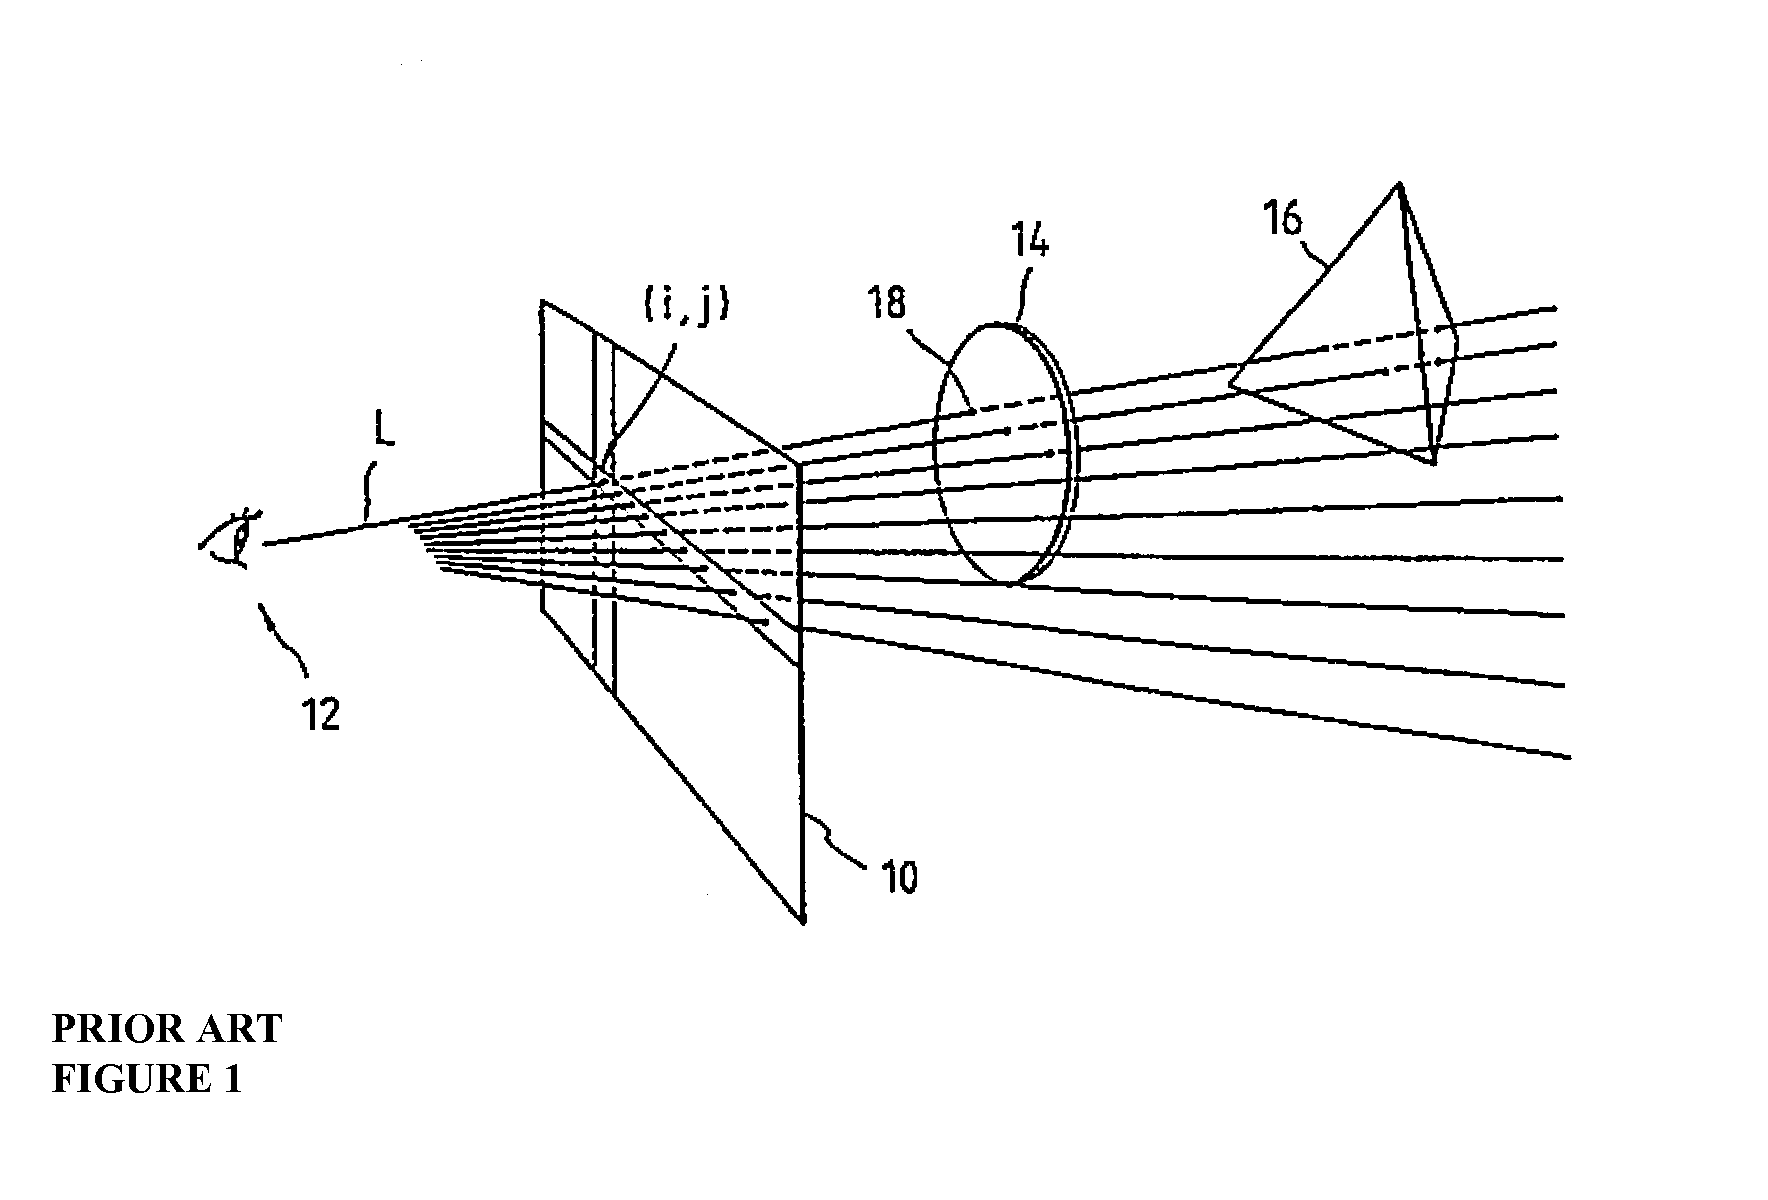 Lines-of-sight and viewsheds determination system